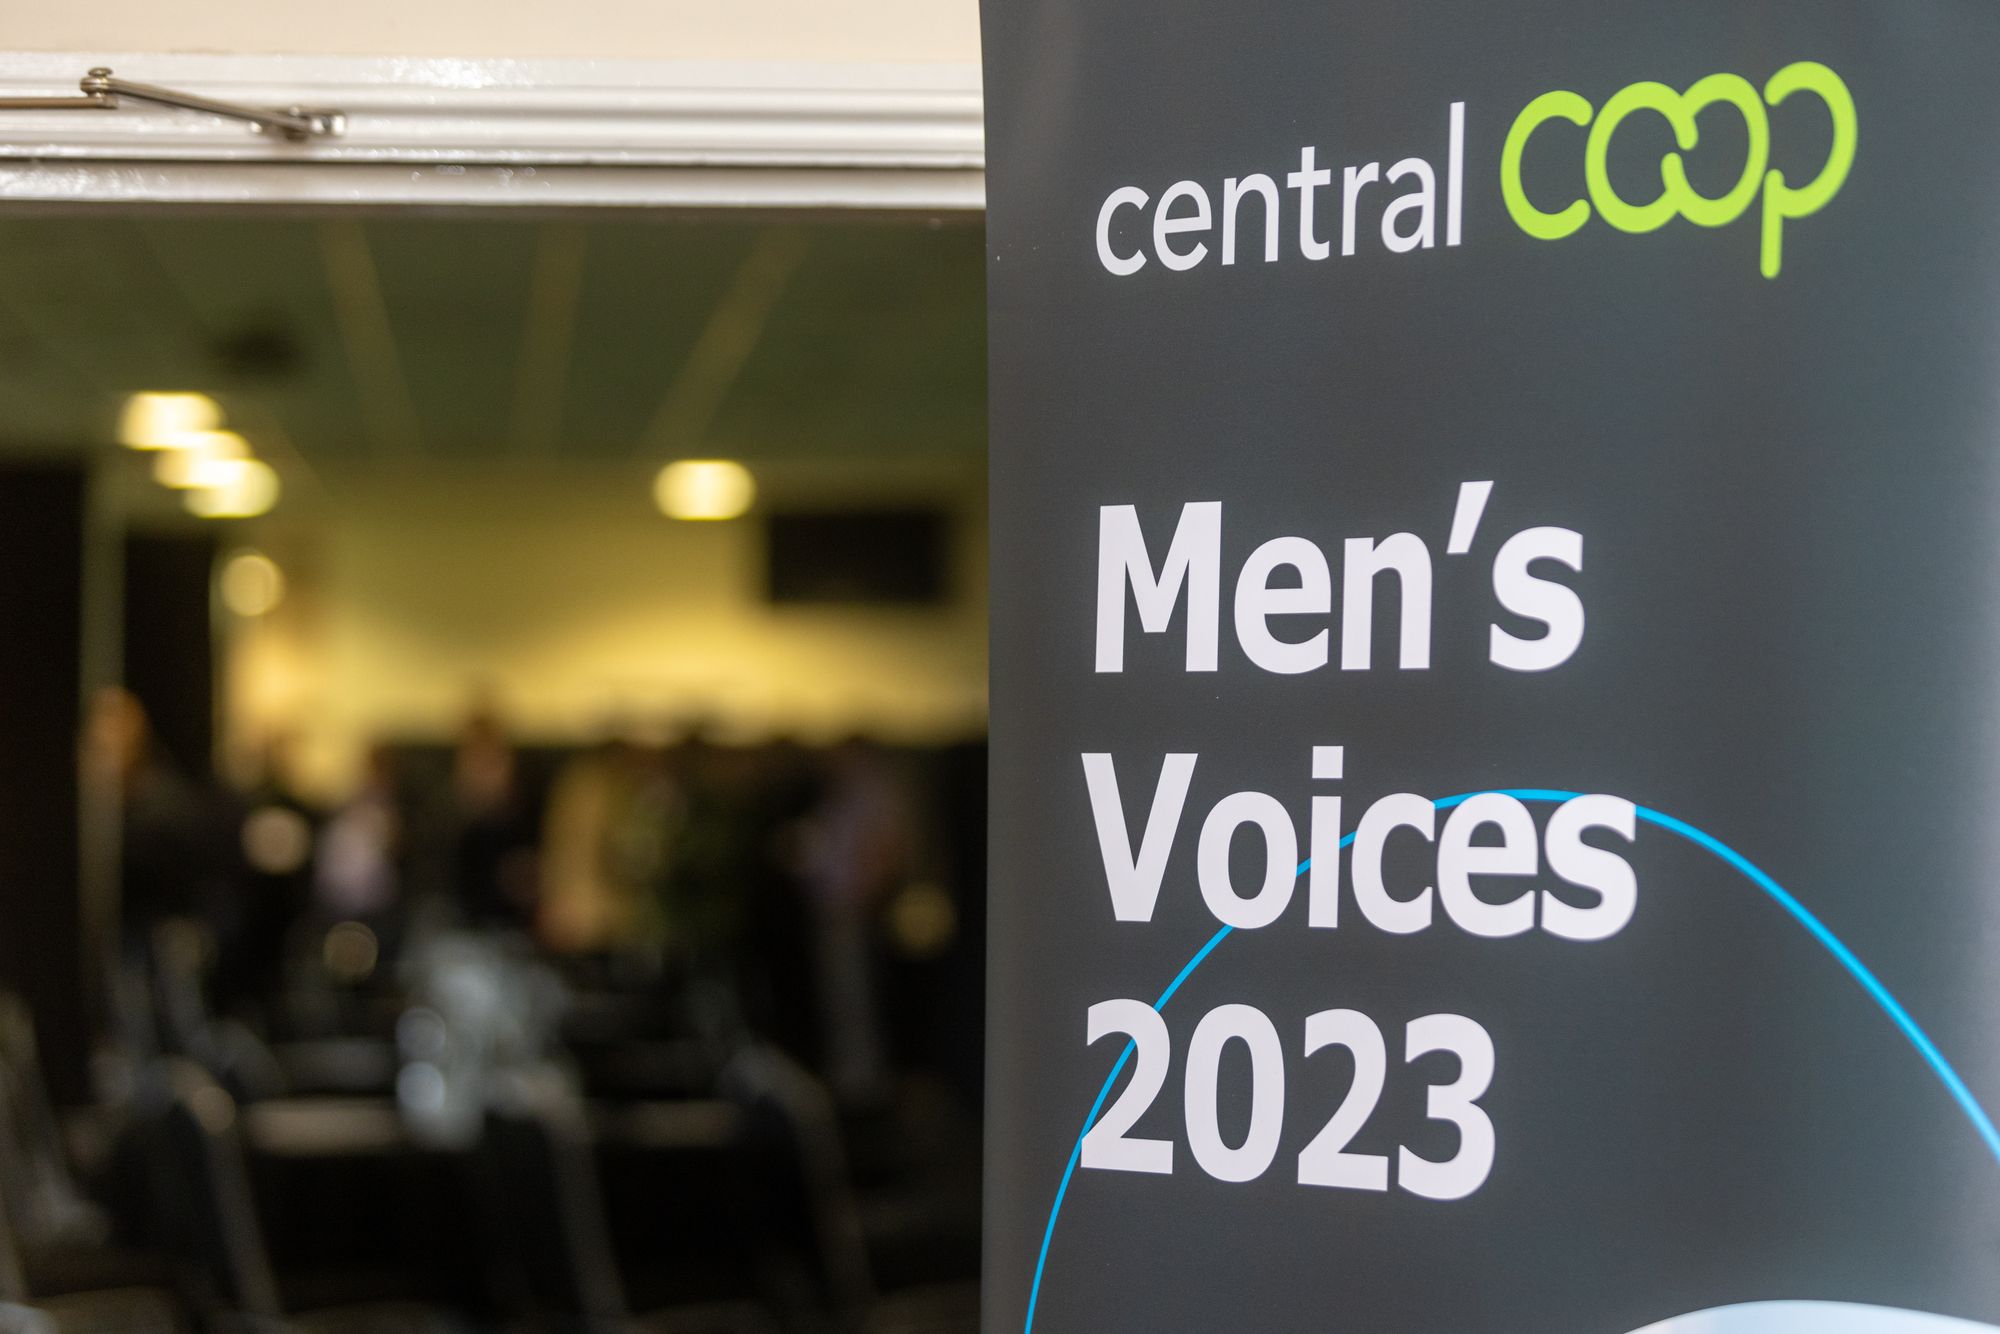 Men's Voices - A day for men to talk